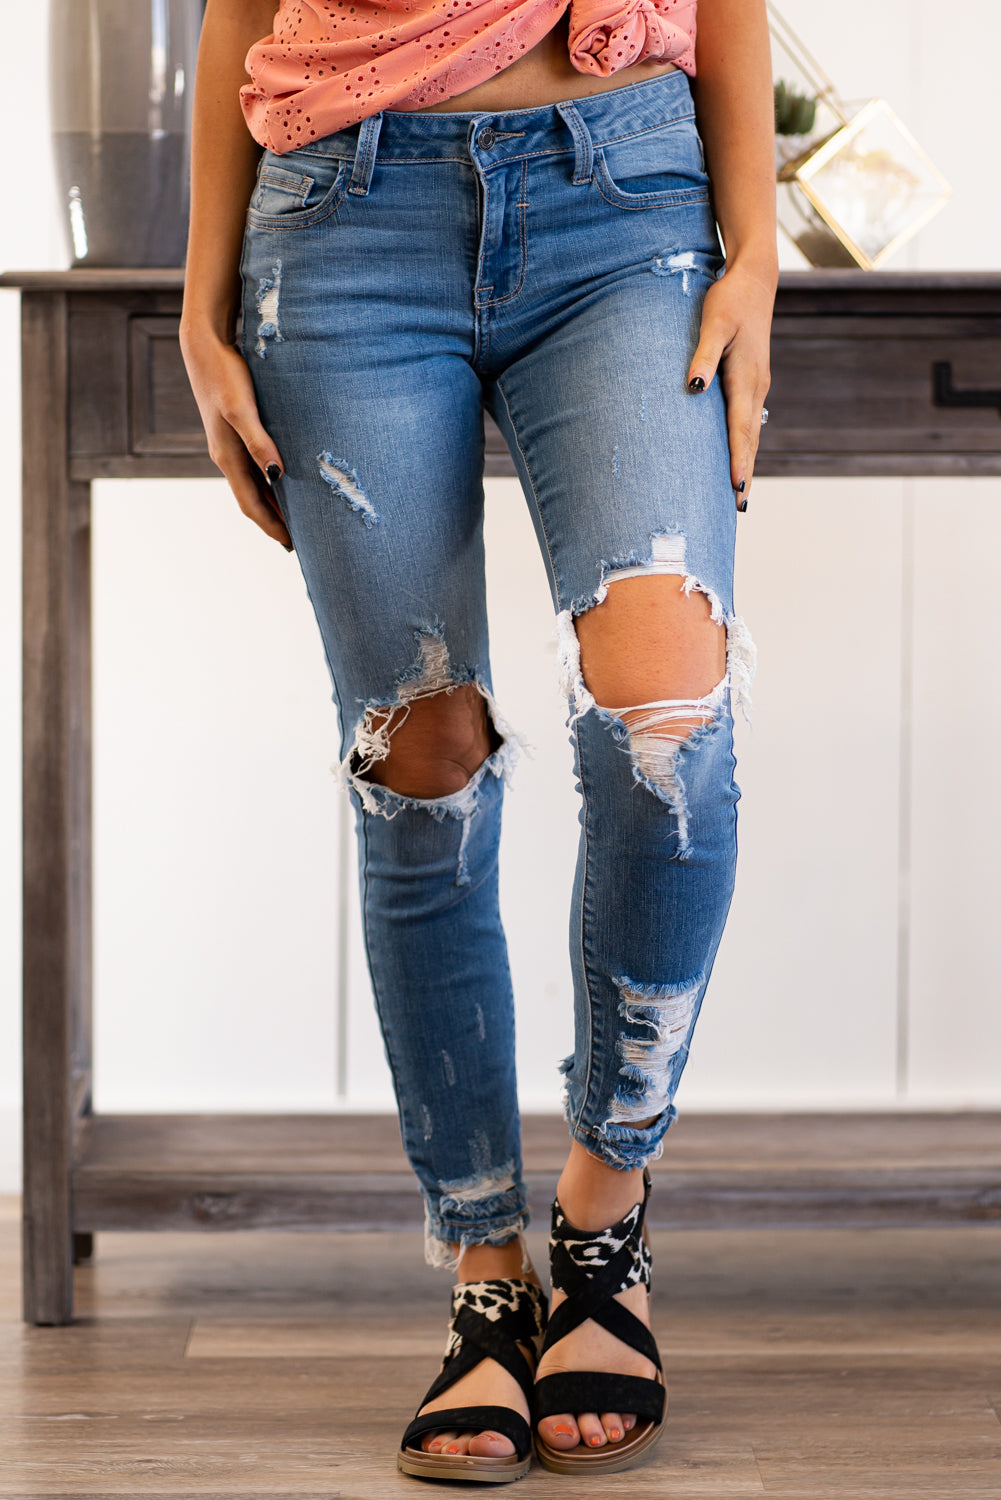 Cello Jeans  These jeans can be flattering, trendy and comfy. You can both dress up and dress down with body suit or crop top. Collection: Spring 2021 Color: Light Blue Wash Cut: Crop Ankle Skinny, 26.5" Inseam Rise: Mid-Rise, 8.5" Front Rise 98% COTTON 2% SPANDEX Fly: Zipper Style #: WV75236LTD Contact us for any additional measurements or sizing.  Haley wears a size small top, a 1 in jeans, and a small in tops. She is wearing a size 1 in these jeans.